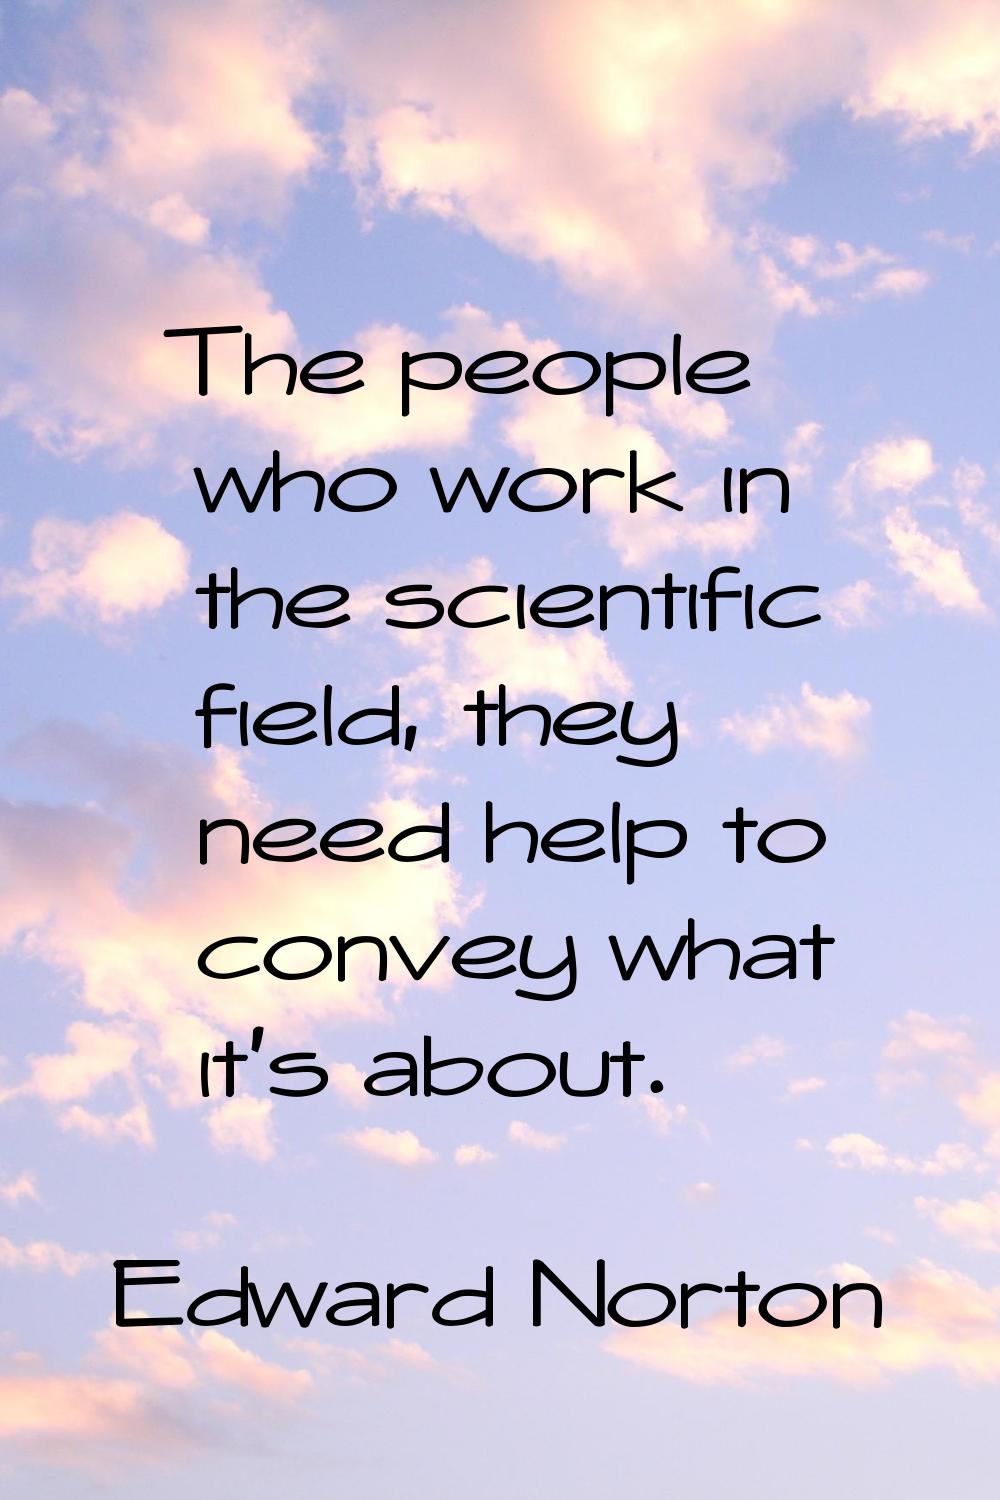 The people who work in the scientific field, they need help to convey what it's about.